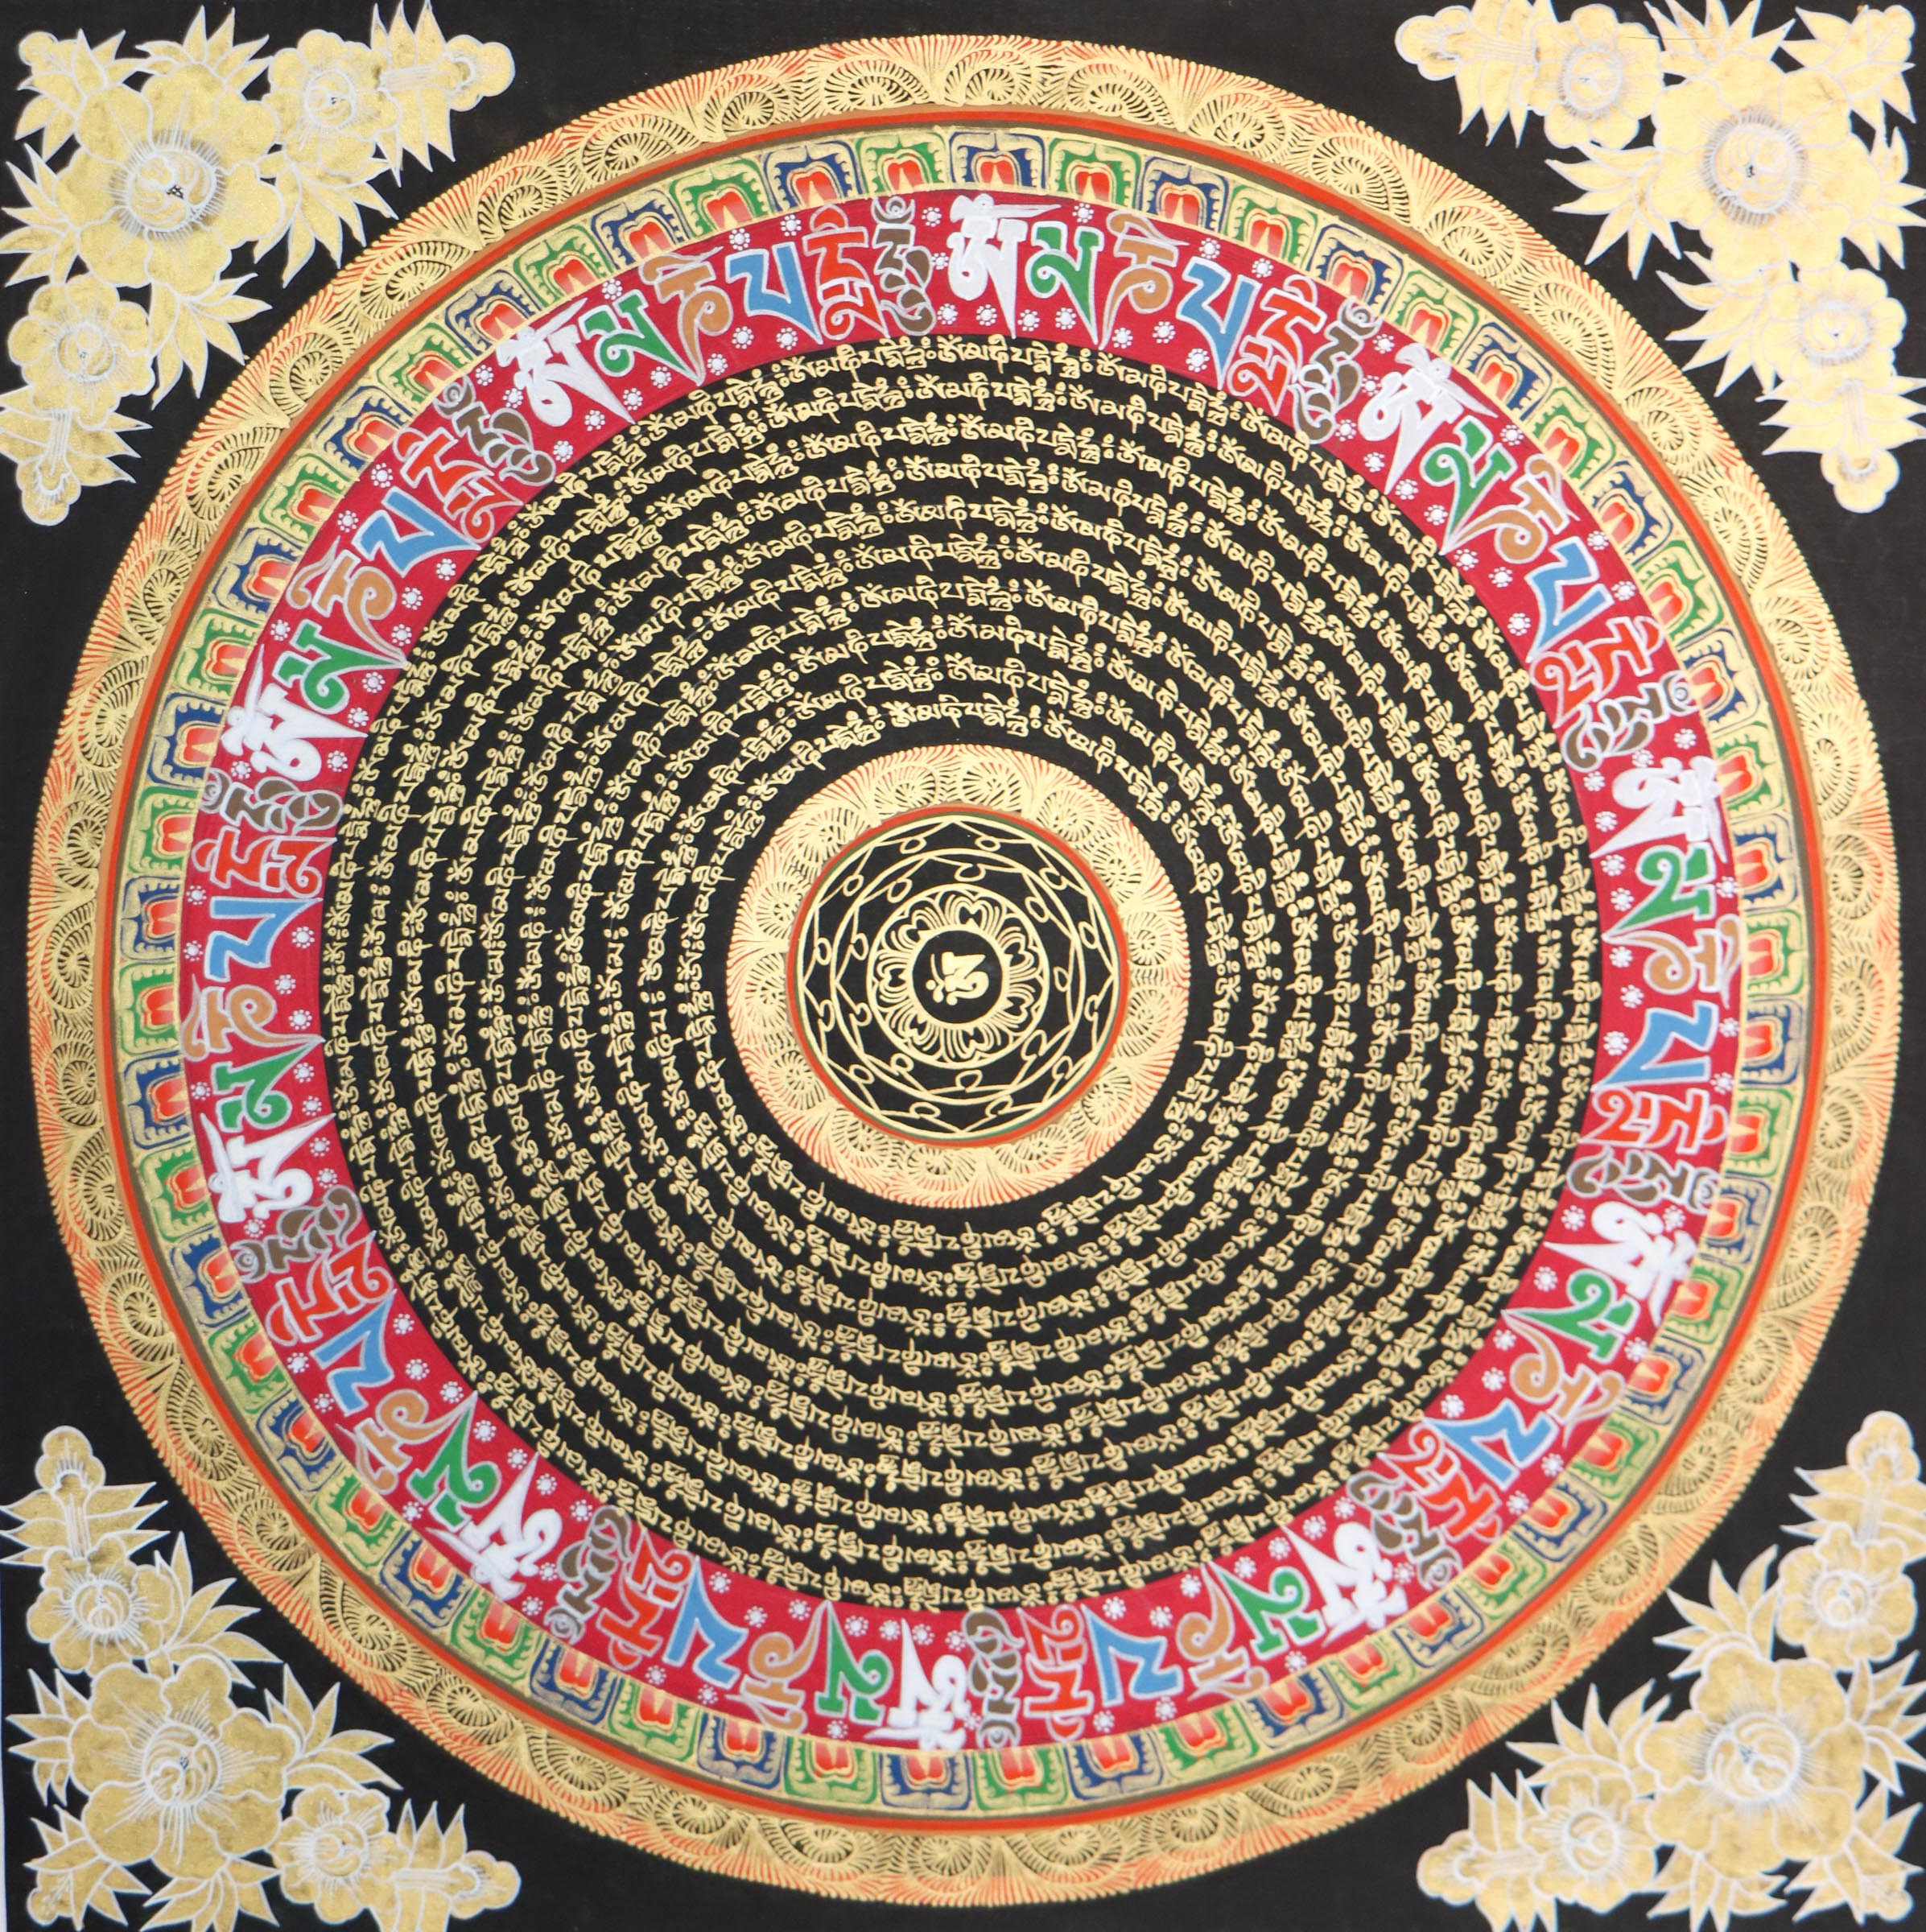 Black and Gold Mandala large size for home decor - Tibetan Thangka for good luck and positive enrgy